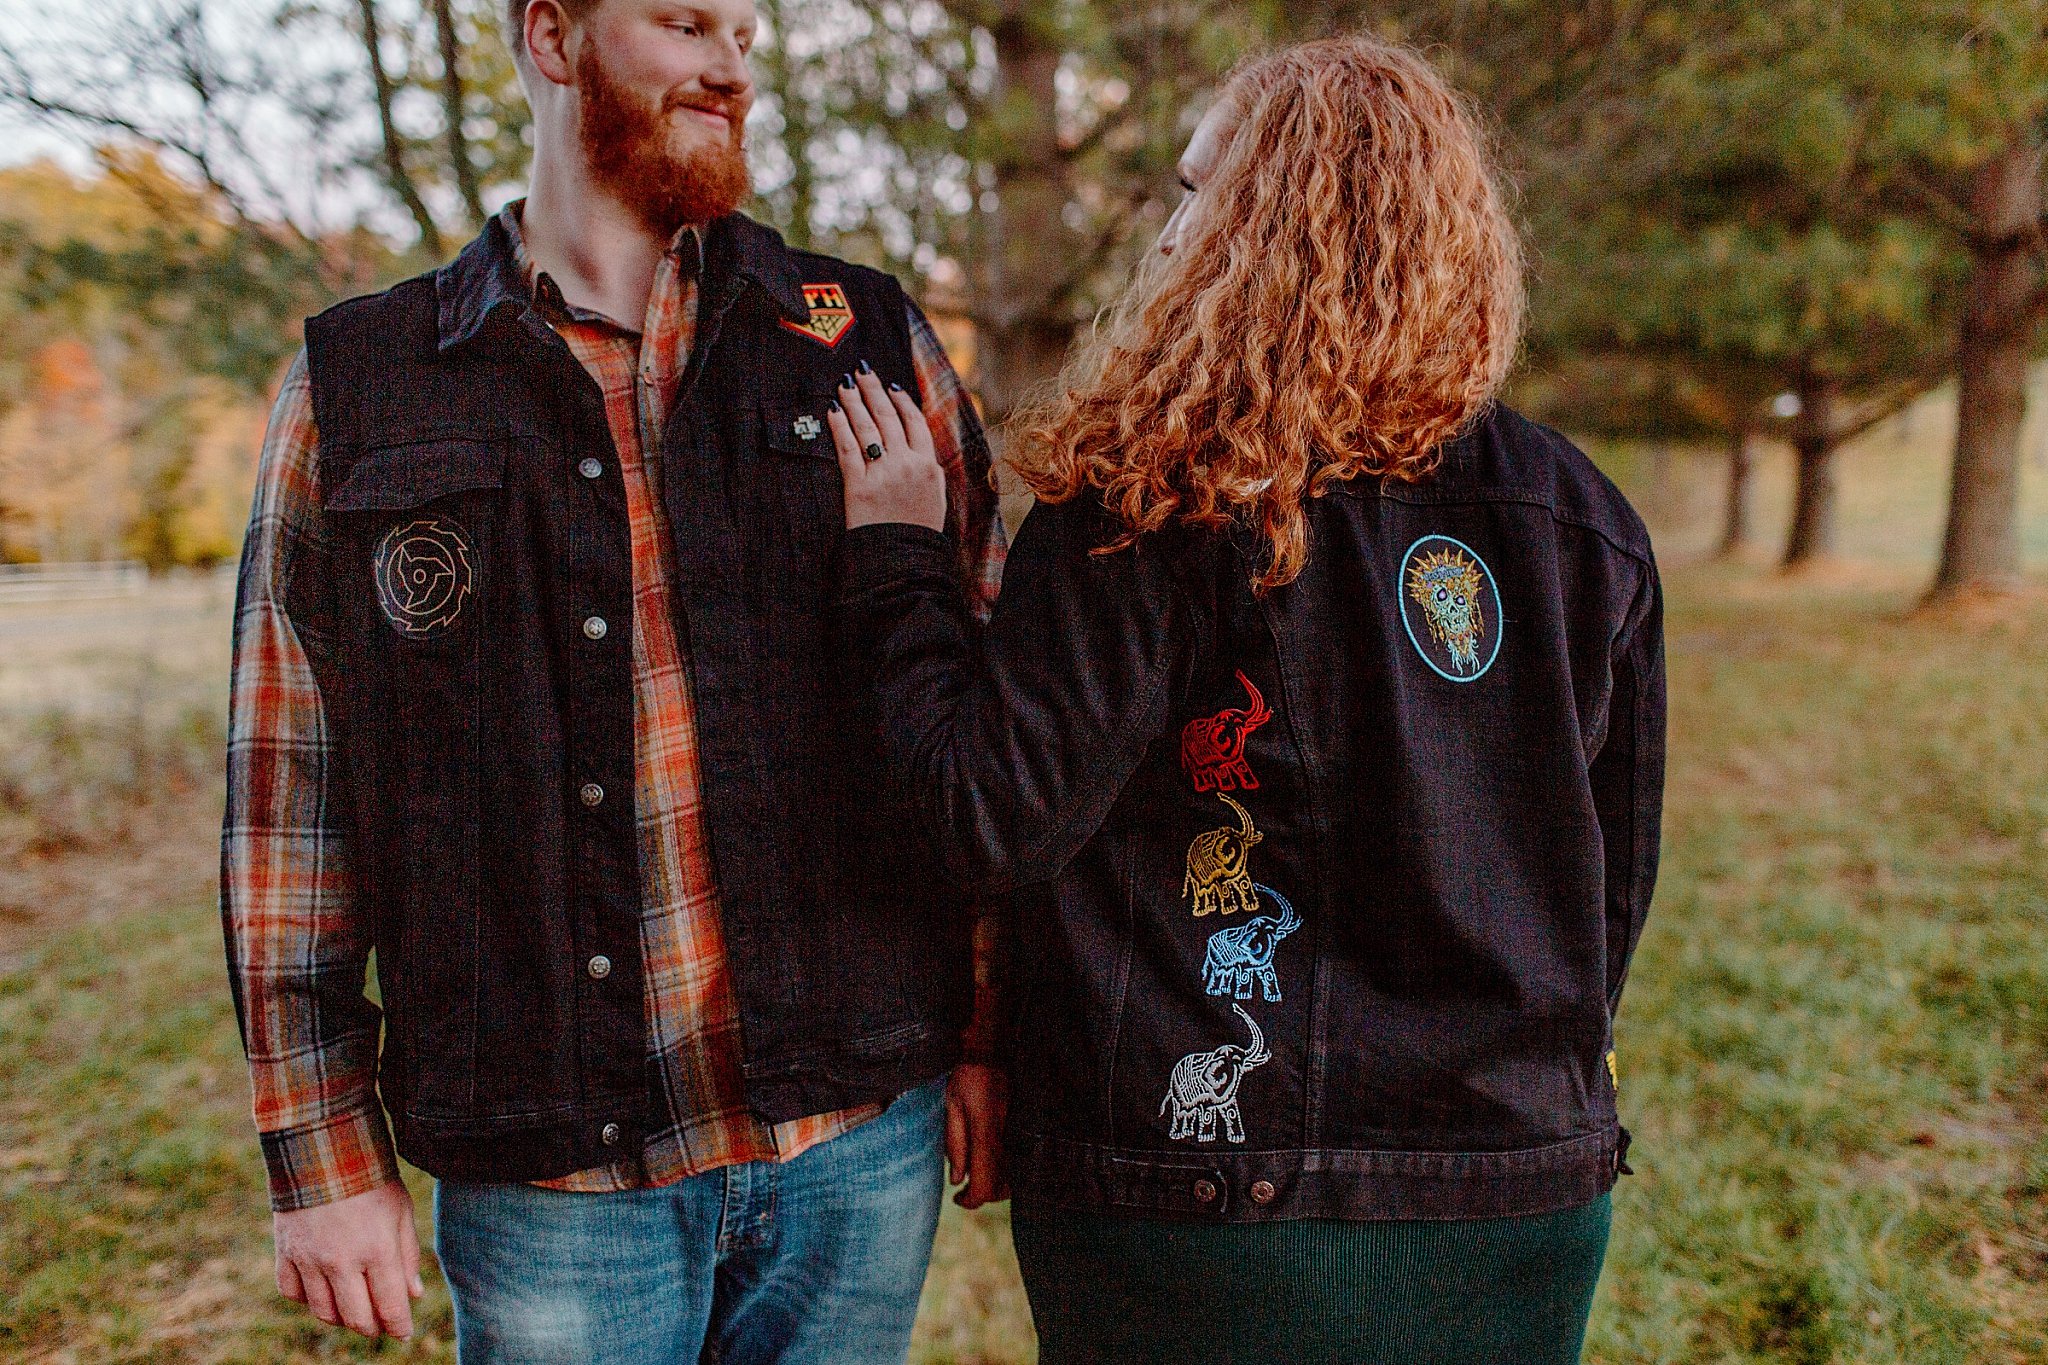  Two people show off jackets by Arizona elopement photographer 